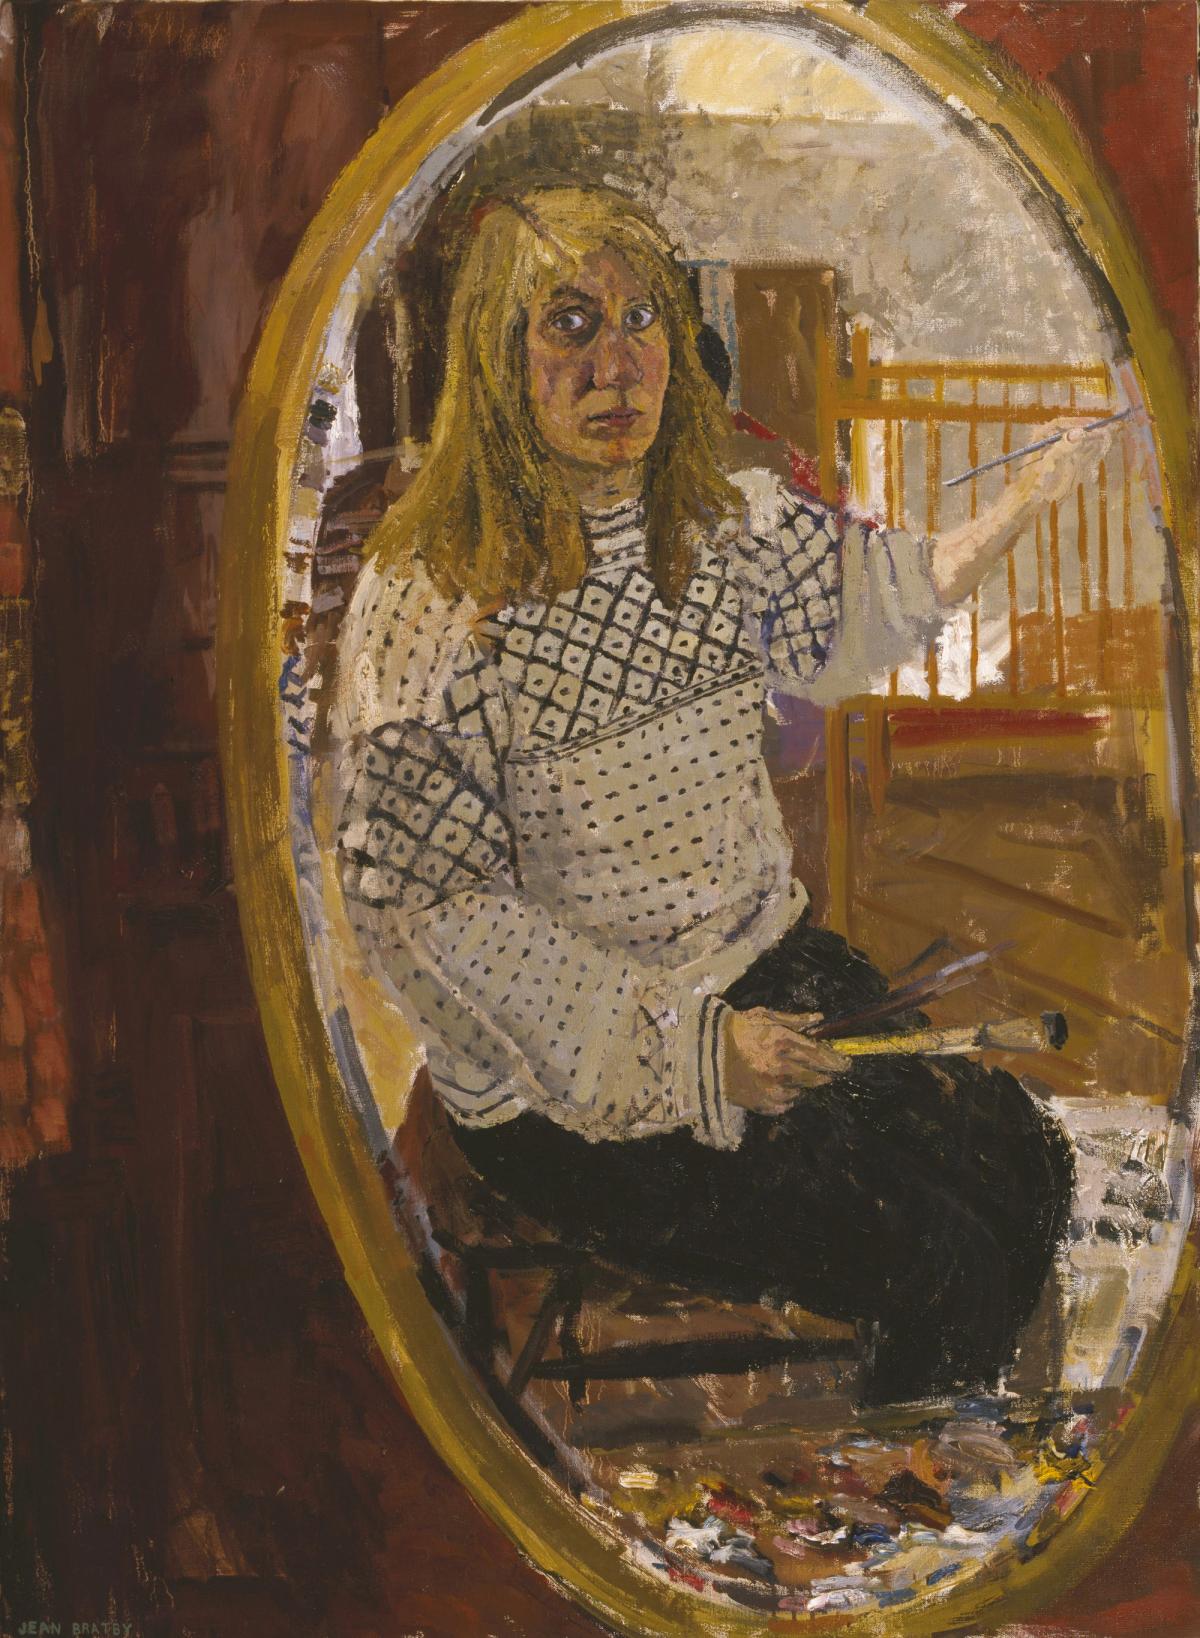 A 1959 self-portrait by Jean Cooke. The artist often looked “at herself quizzically, recording what she looked like and also how she felt,” says the show’s curator Photo: © Tate and Estate of Jean Cooke